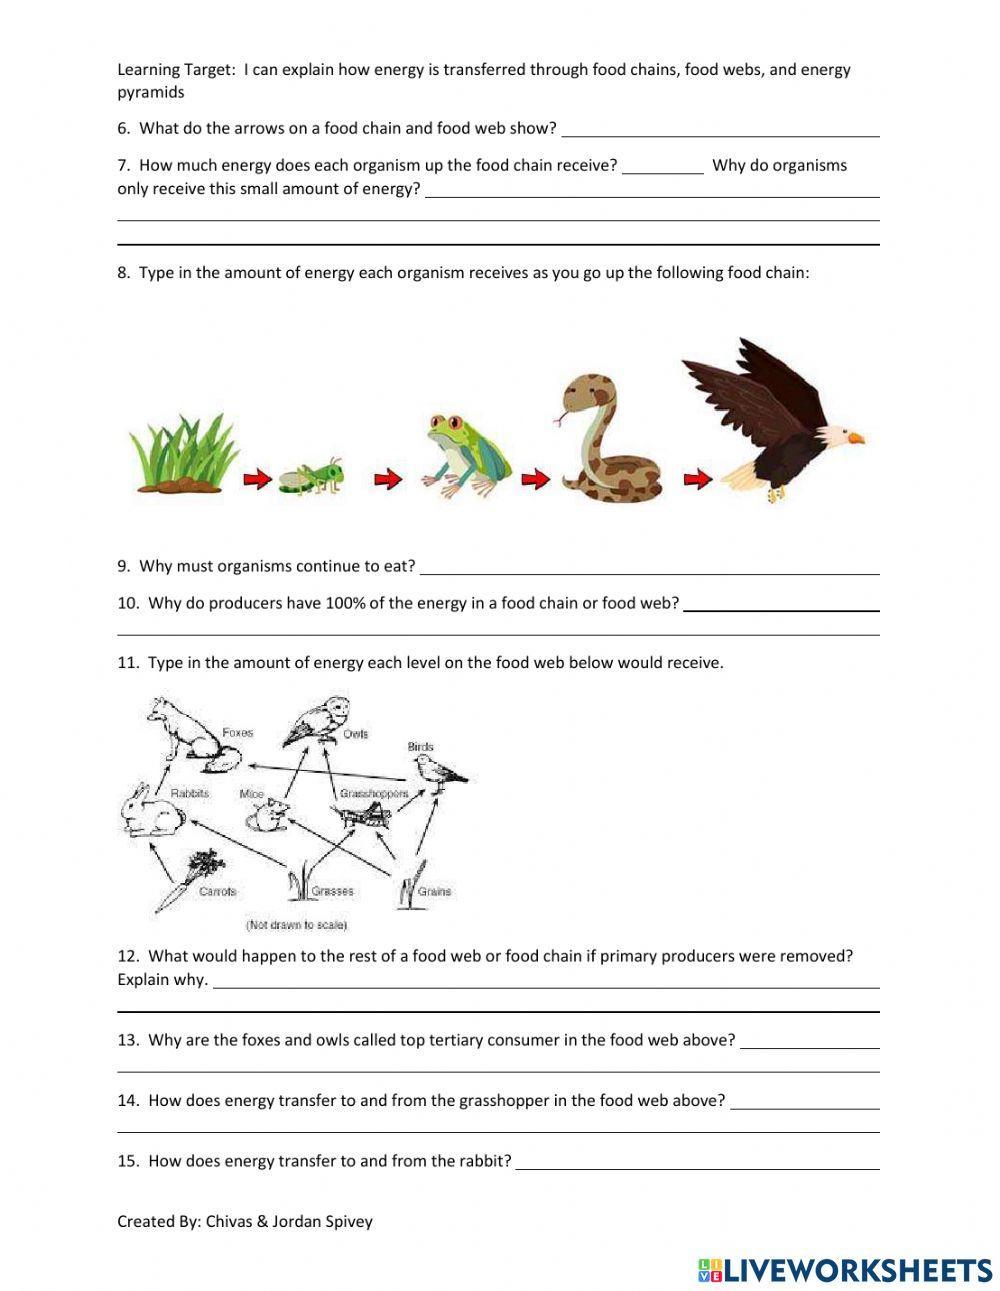 Food chains, Food webs, & Energy pyramids video notes with quiz